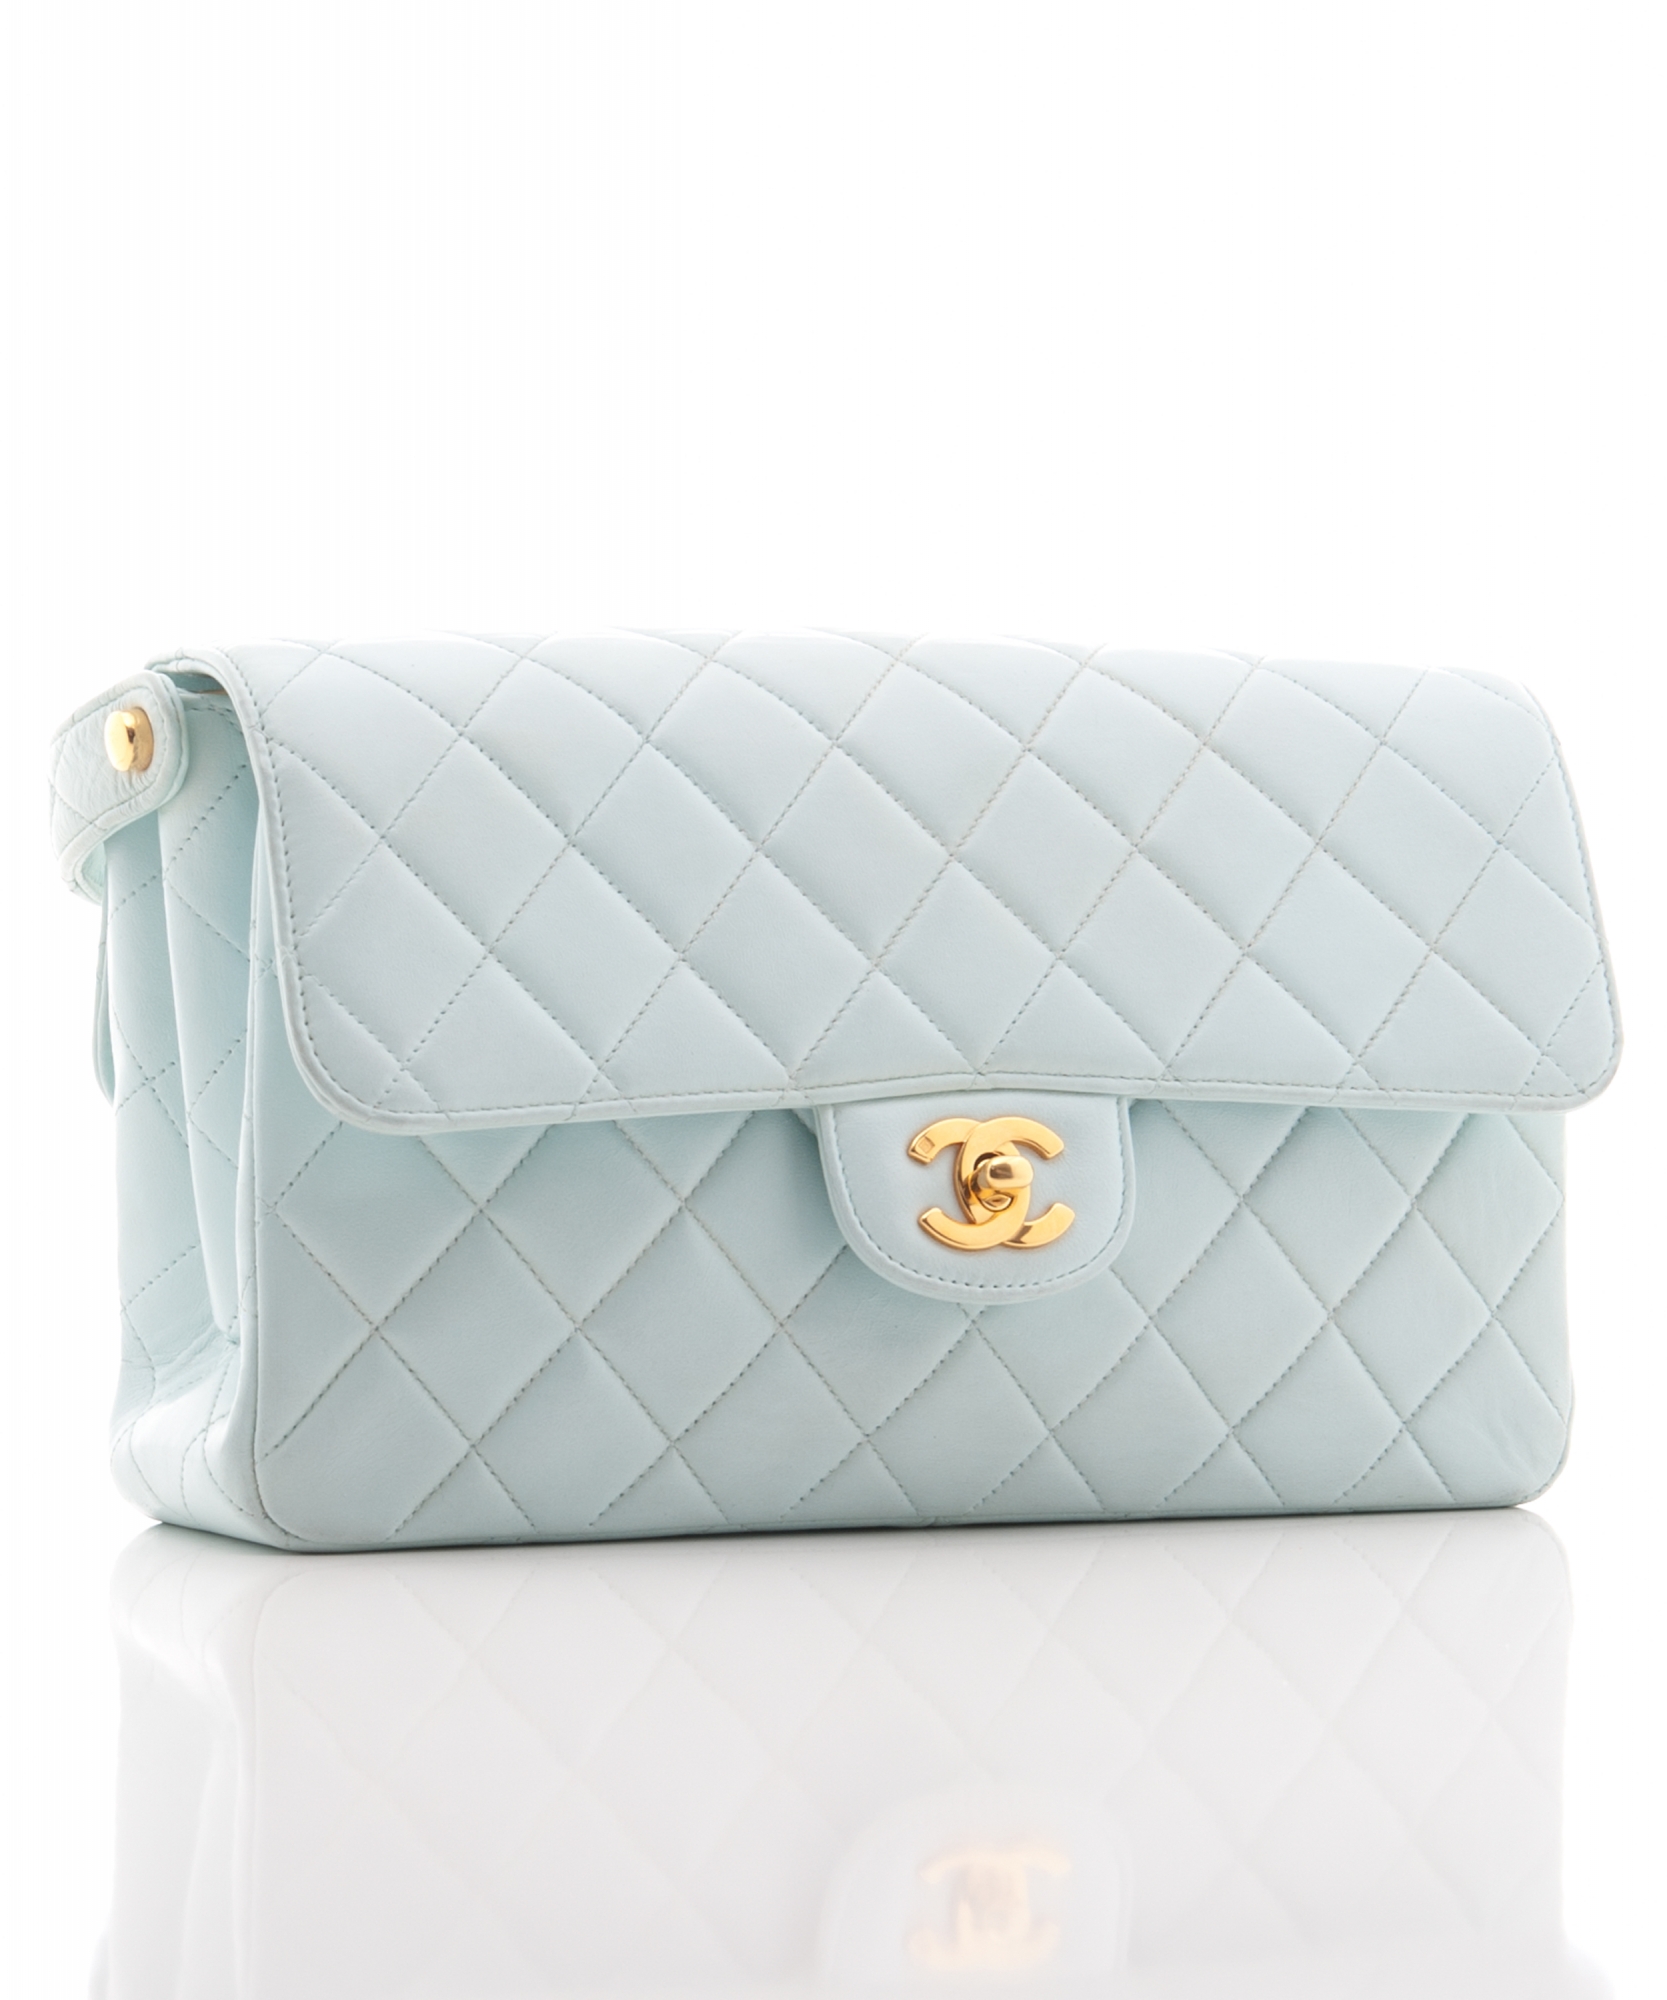 Chanel Light Blue Quilted Double Flap Bag - Chanel | ArtListings